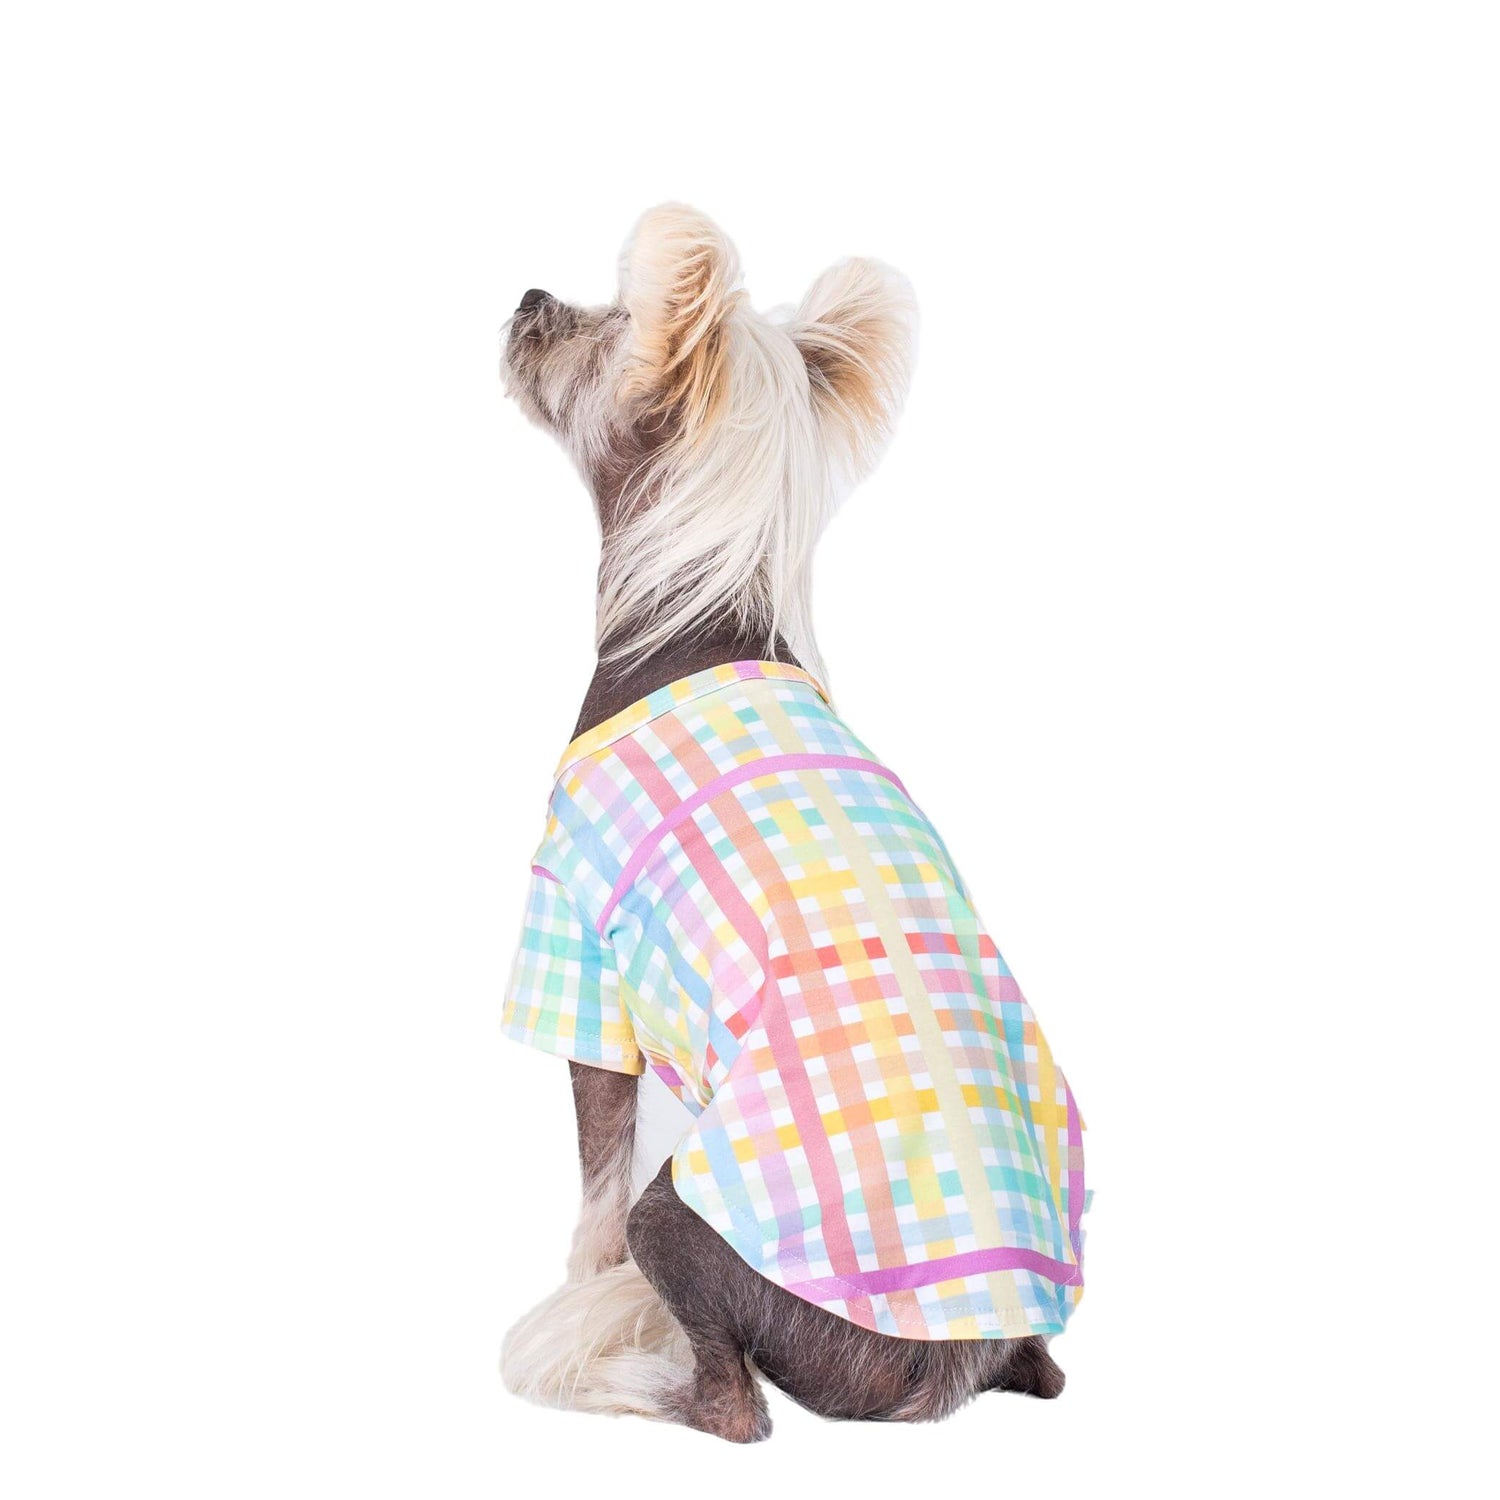 Chinese Crested Dog wearing a Vibrant Hound Colour Me Gingham Shirt for Dogs in Rainbow Color